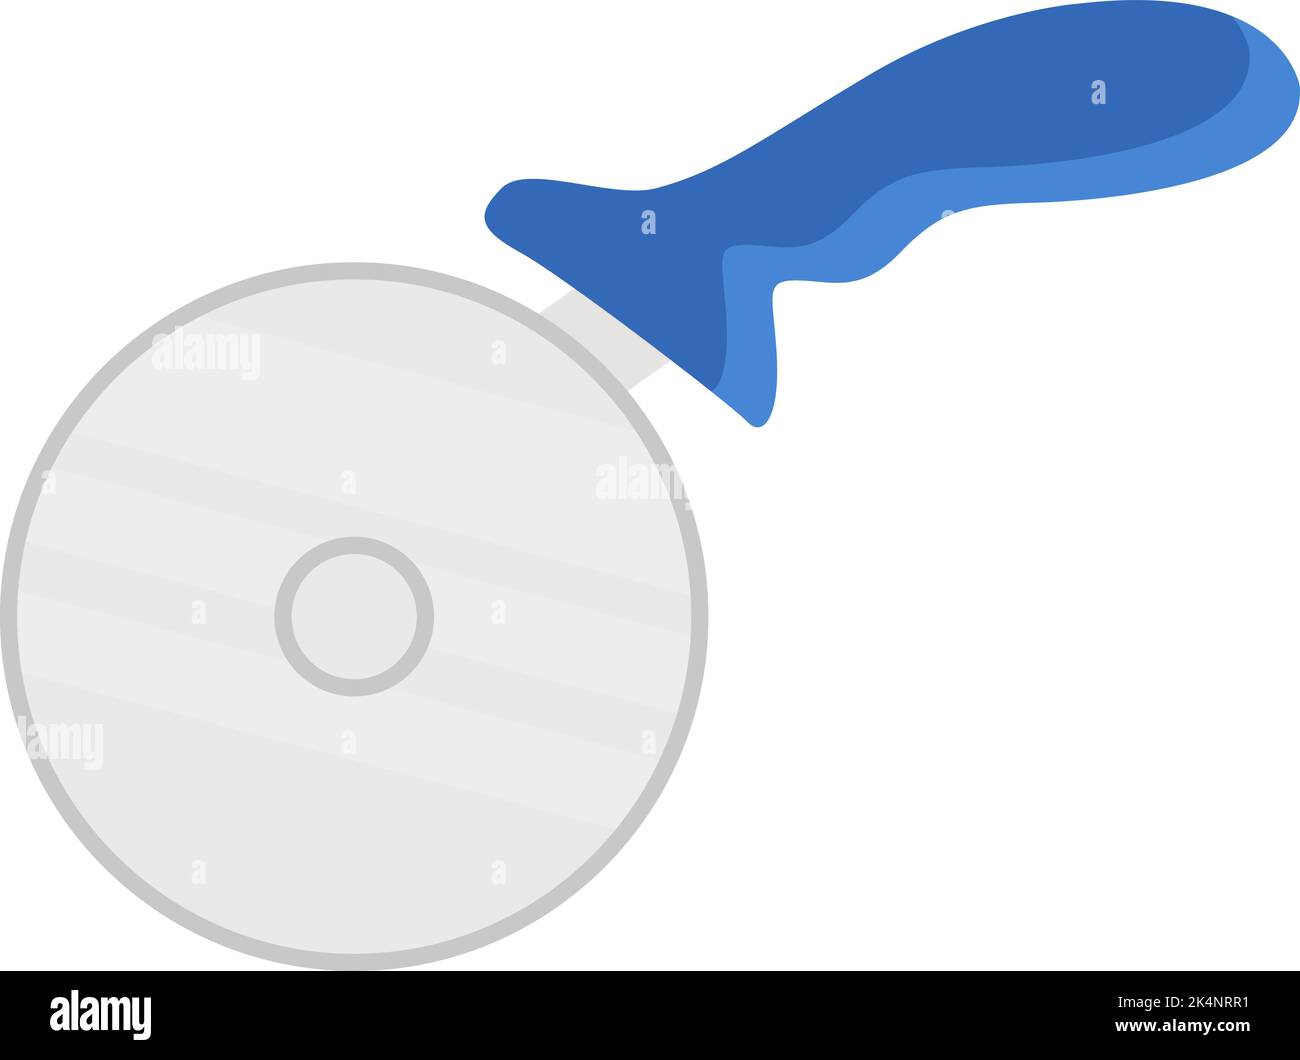 Blue pizza knife, illustration, vector on a white background. Stock Vector